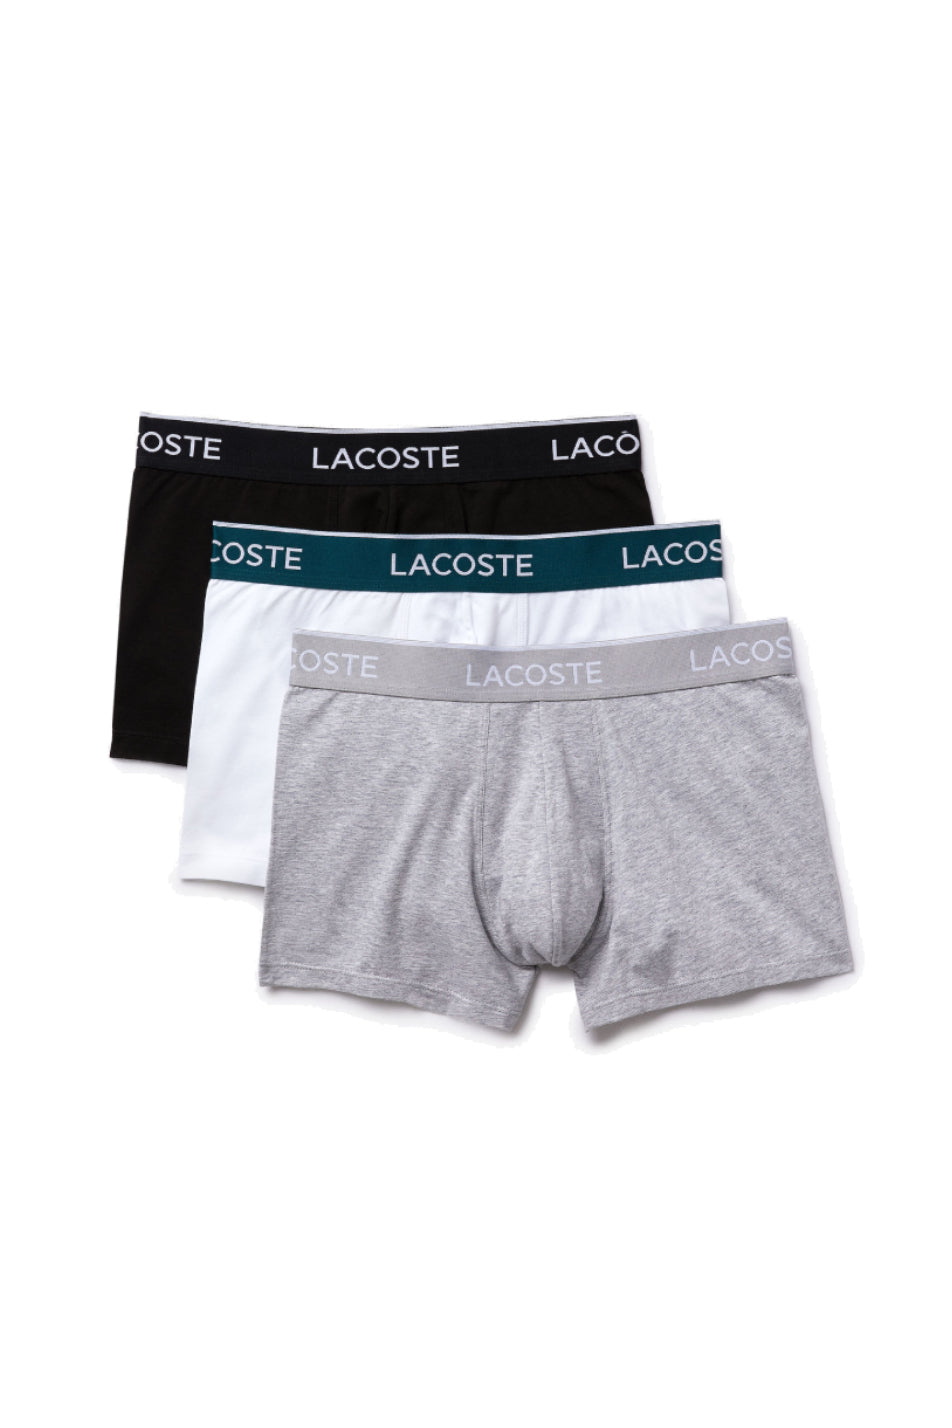 Lacoste 3 Pack Men's Casual Trunks